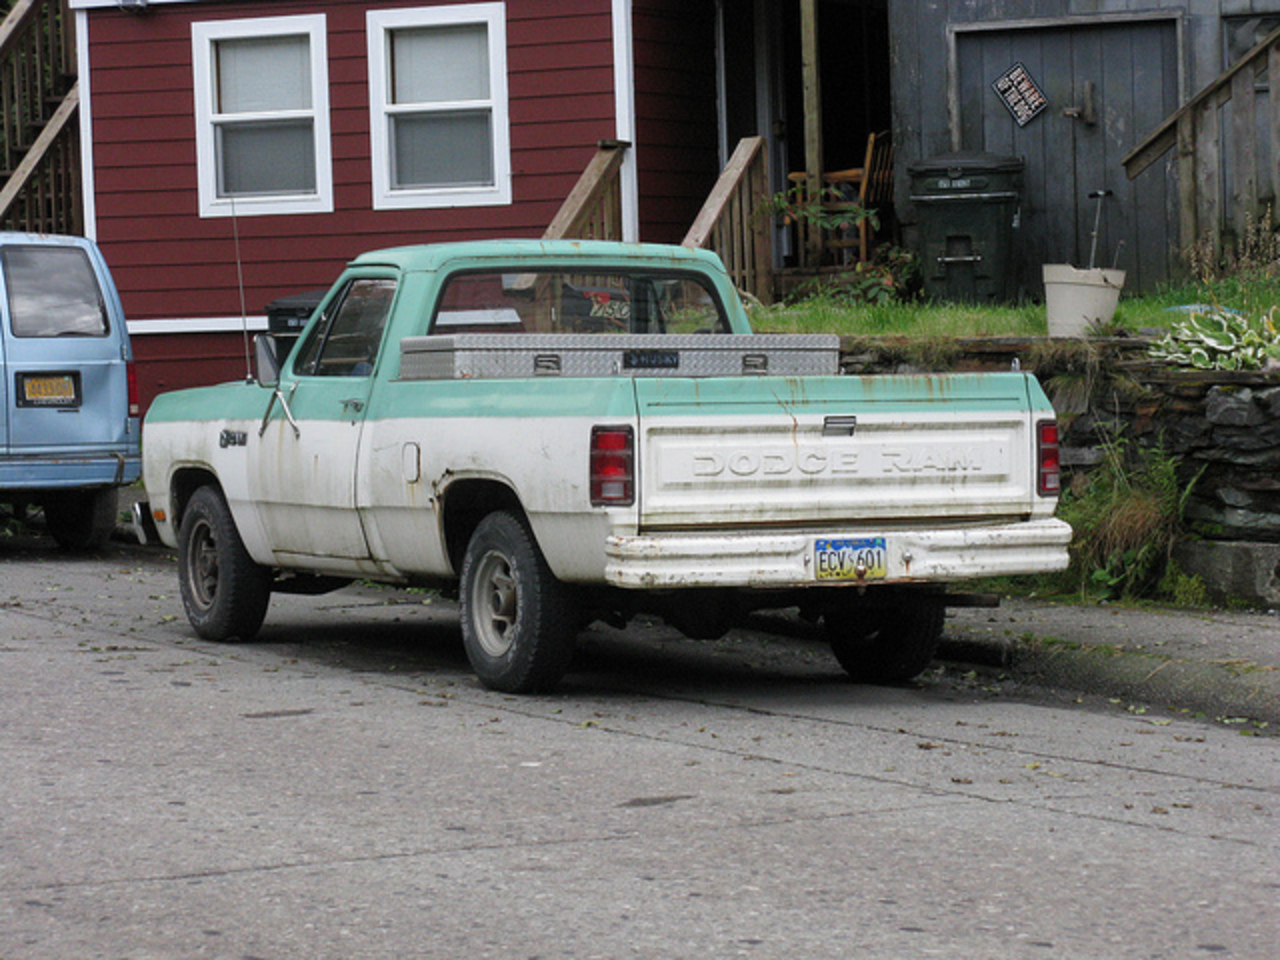 Flickr: The Old Dodge Truck's Pool